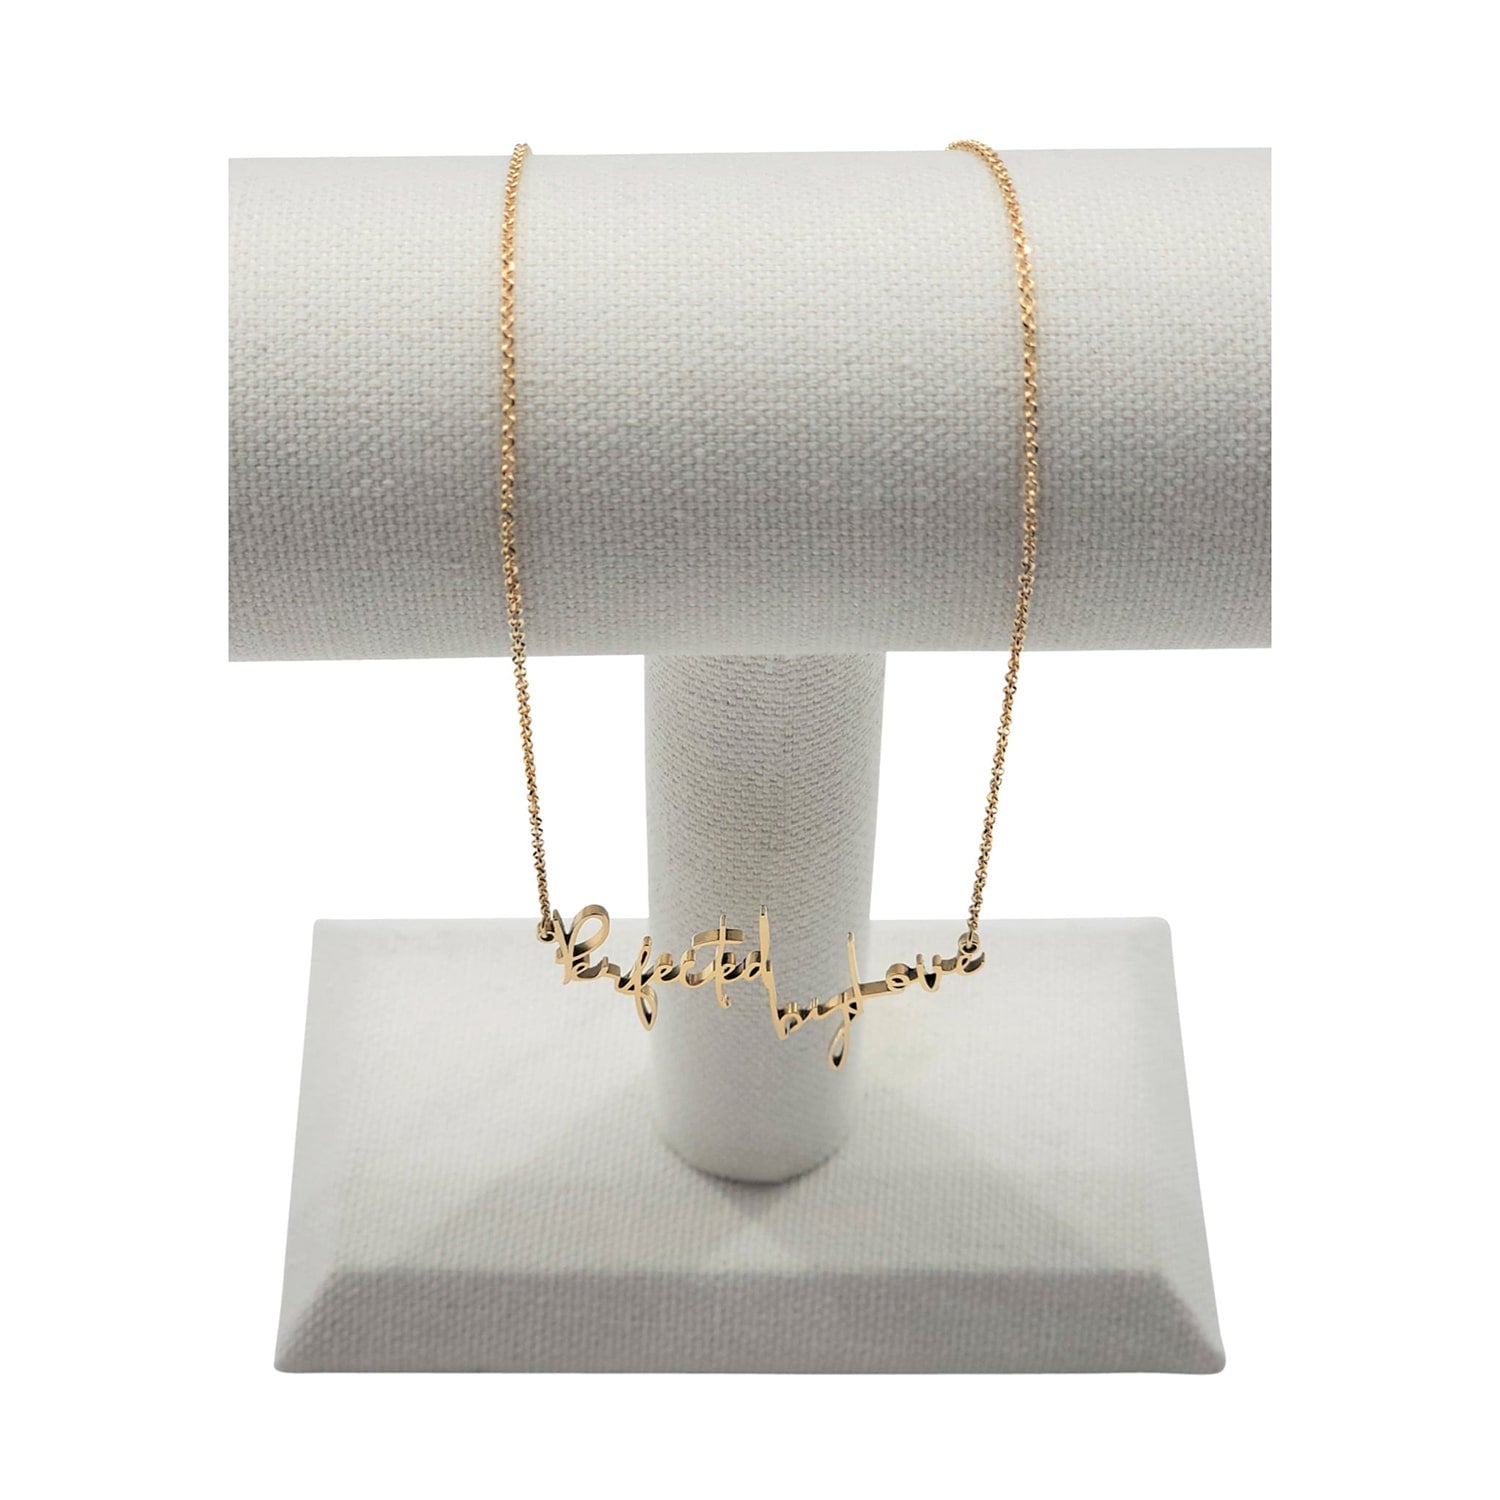 Perfected by Love Gold Necklace